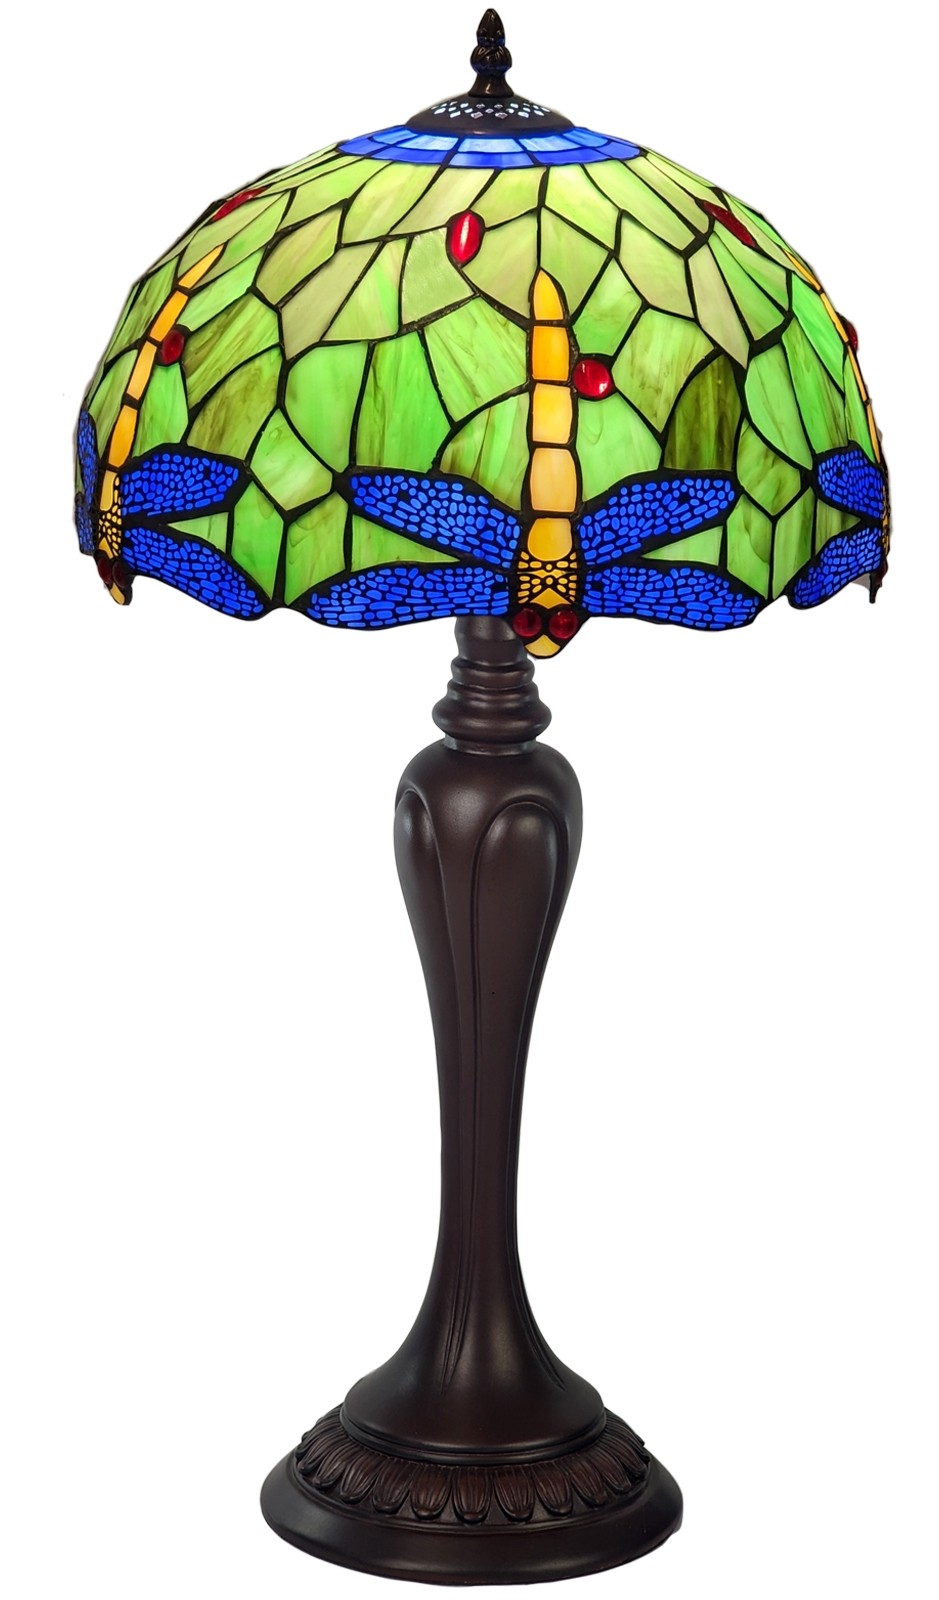 59cm Blue Dragonfly Design Tiffany Table Lamp with Serene Base